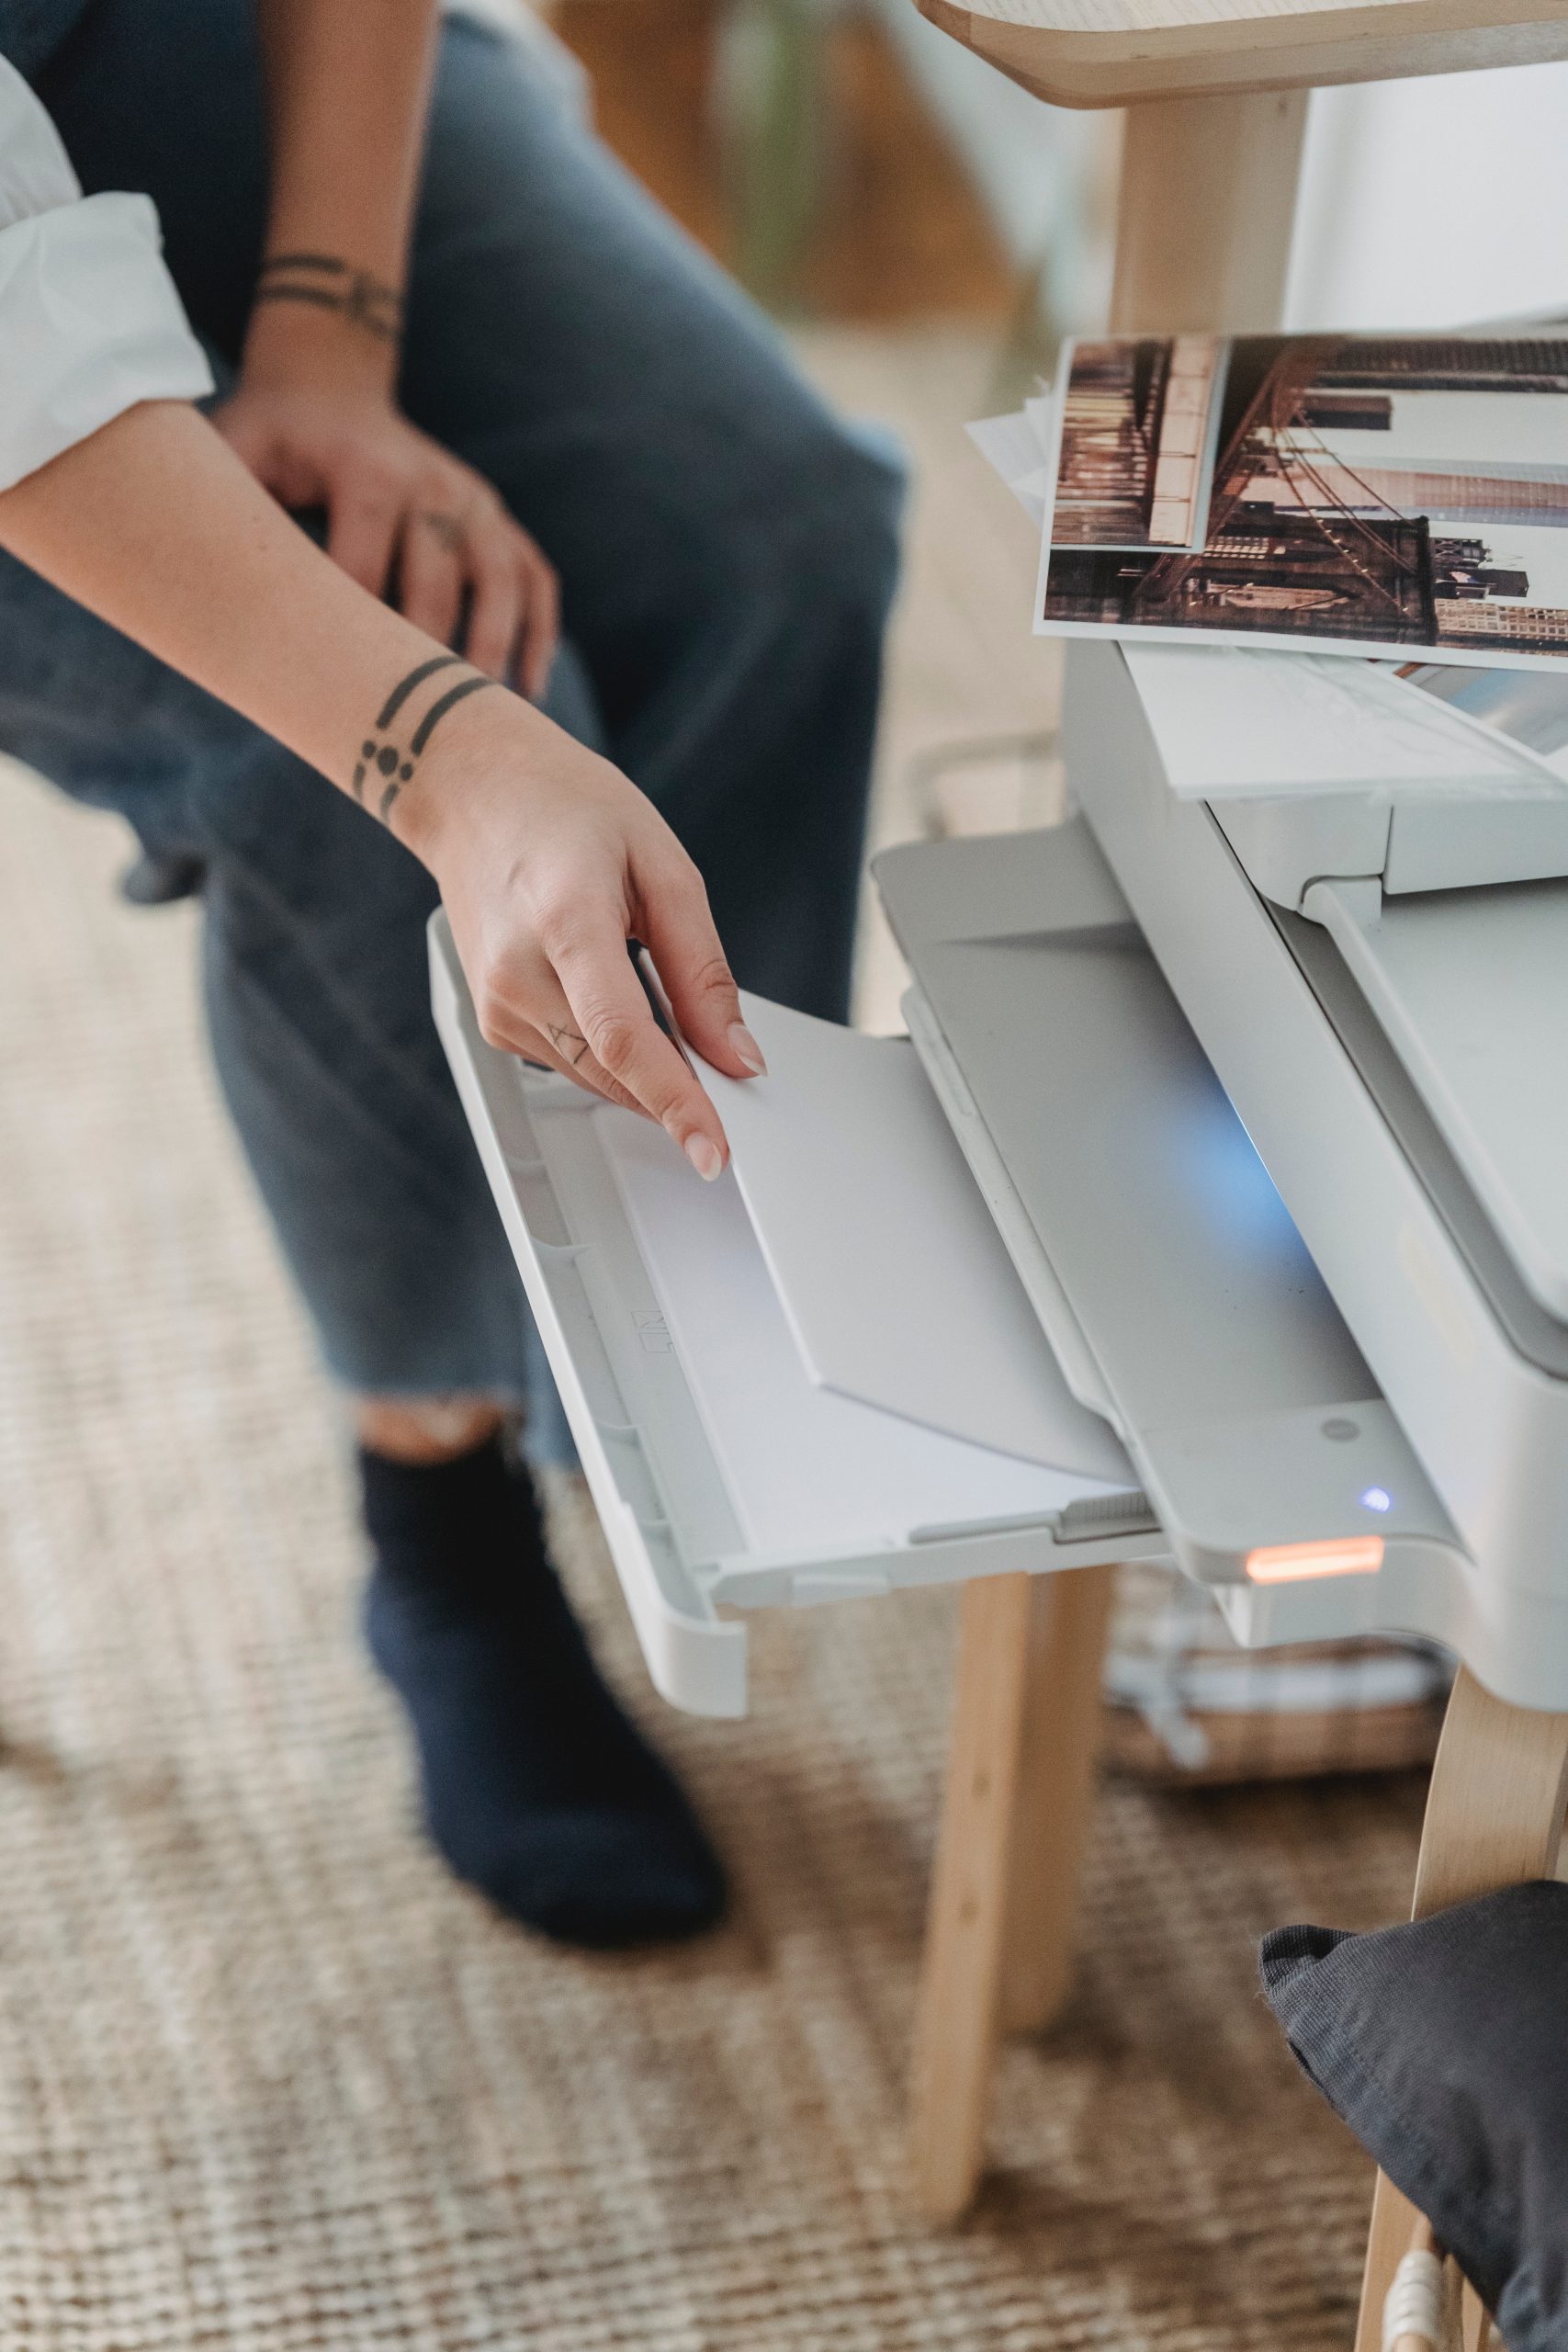 What’s the best printer for the office?